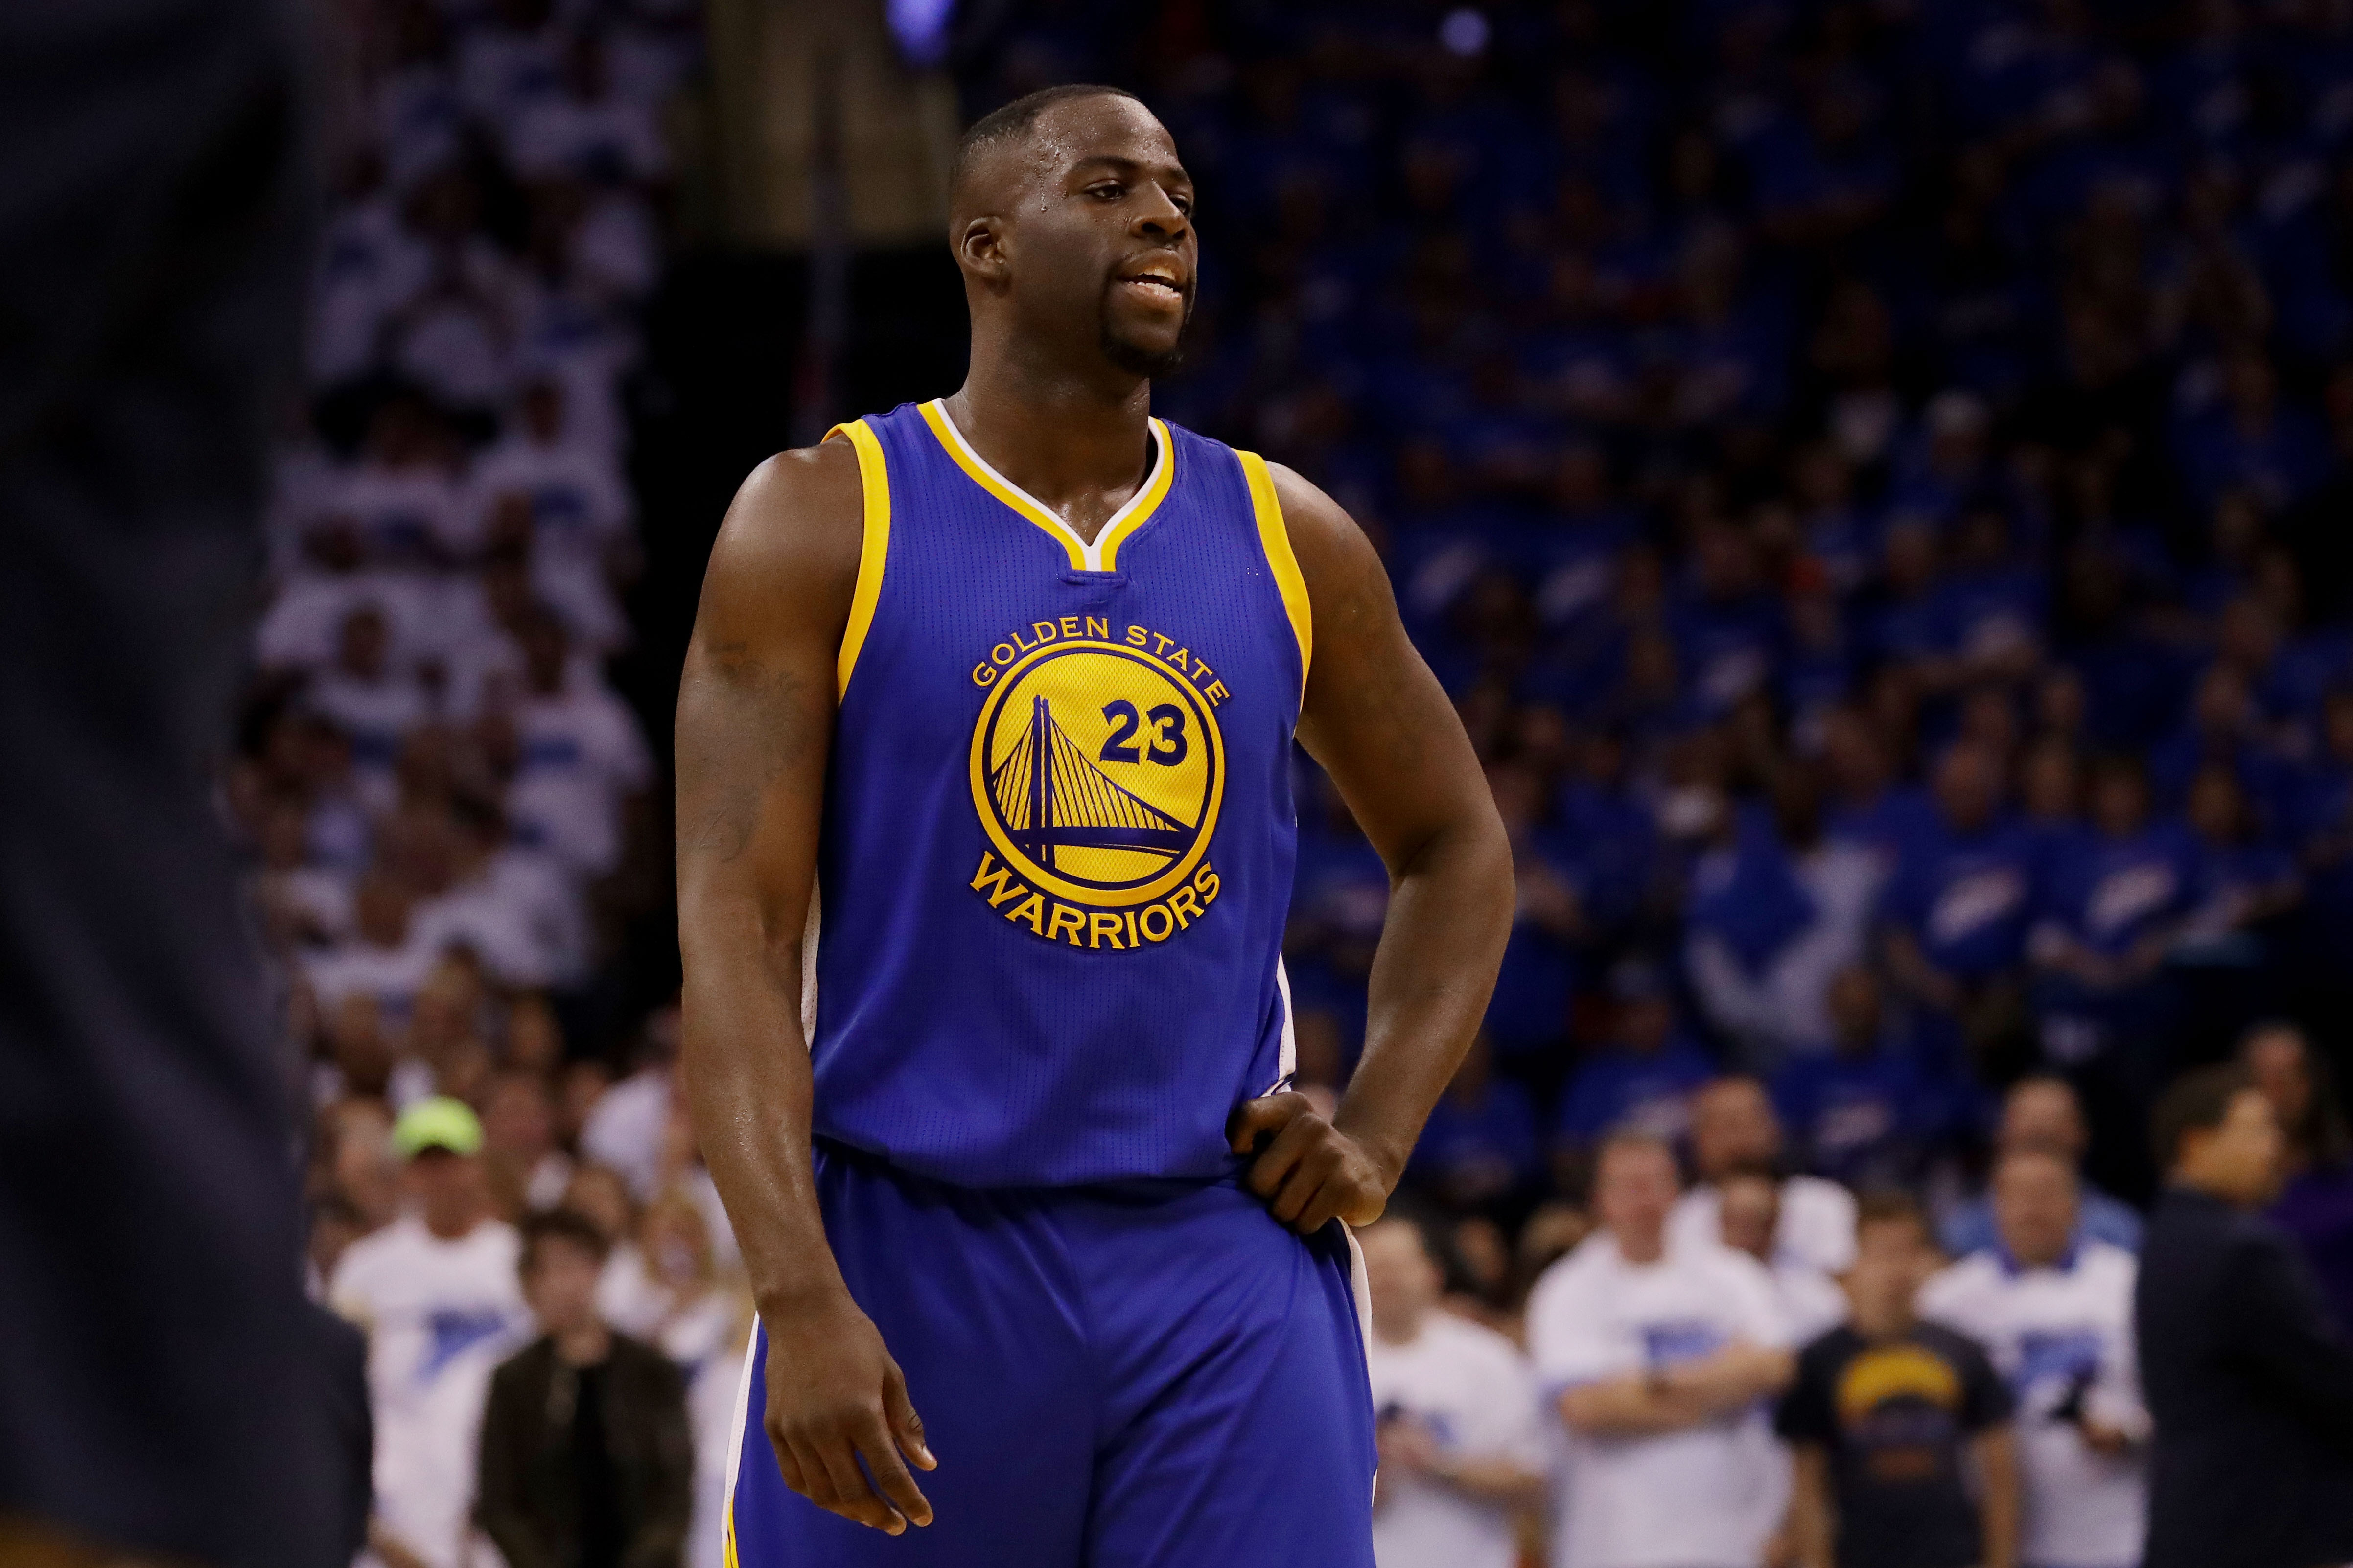 OKLAHOMA CITY, OK - MAY 22: Draymond Green #23 of the Golden State Warriors reacts in the first half against the Oklahoma City Thunder in game three of the Western Conference Finals during the 2016 NBA Playoffs at Chesapeake Energy Arena on May 22, 2016 in Oklahoma City, Oklahoma. (Photo by Ronald Martinez/Getty Images)